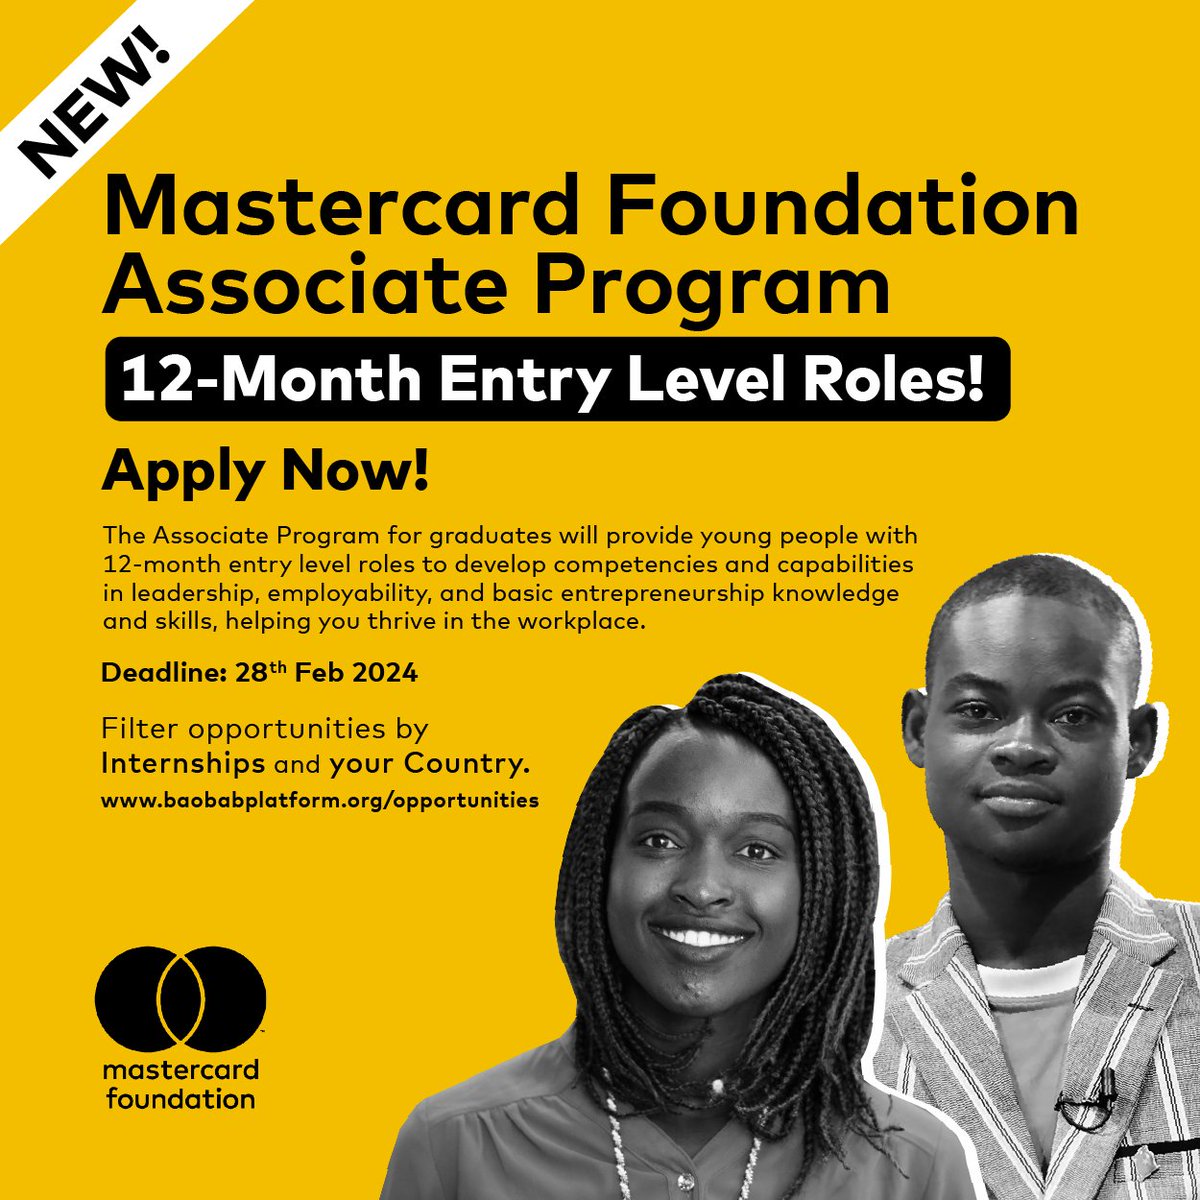 The @MastercardFdn Associate Program has more roles available for you to apply by 28th February 2024. To apply, login or register on the Baobab Platform at lnkd.in/gn98xijs